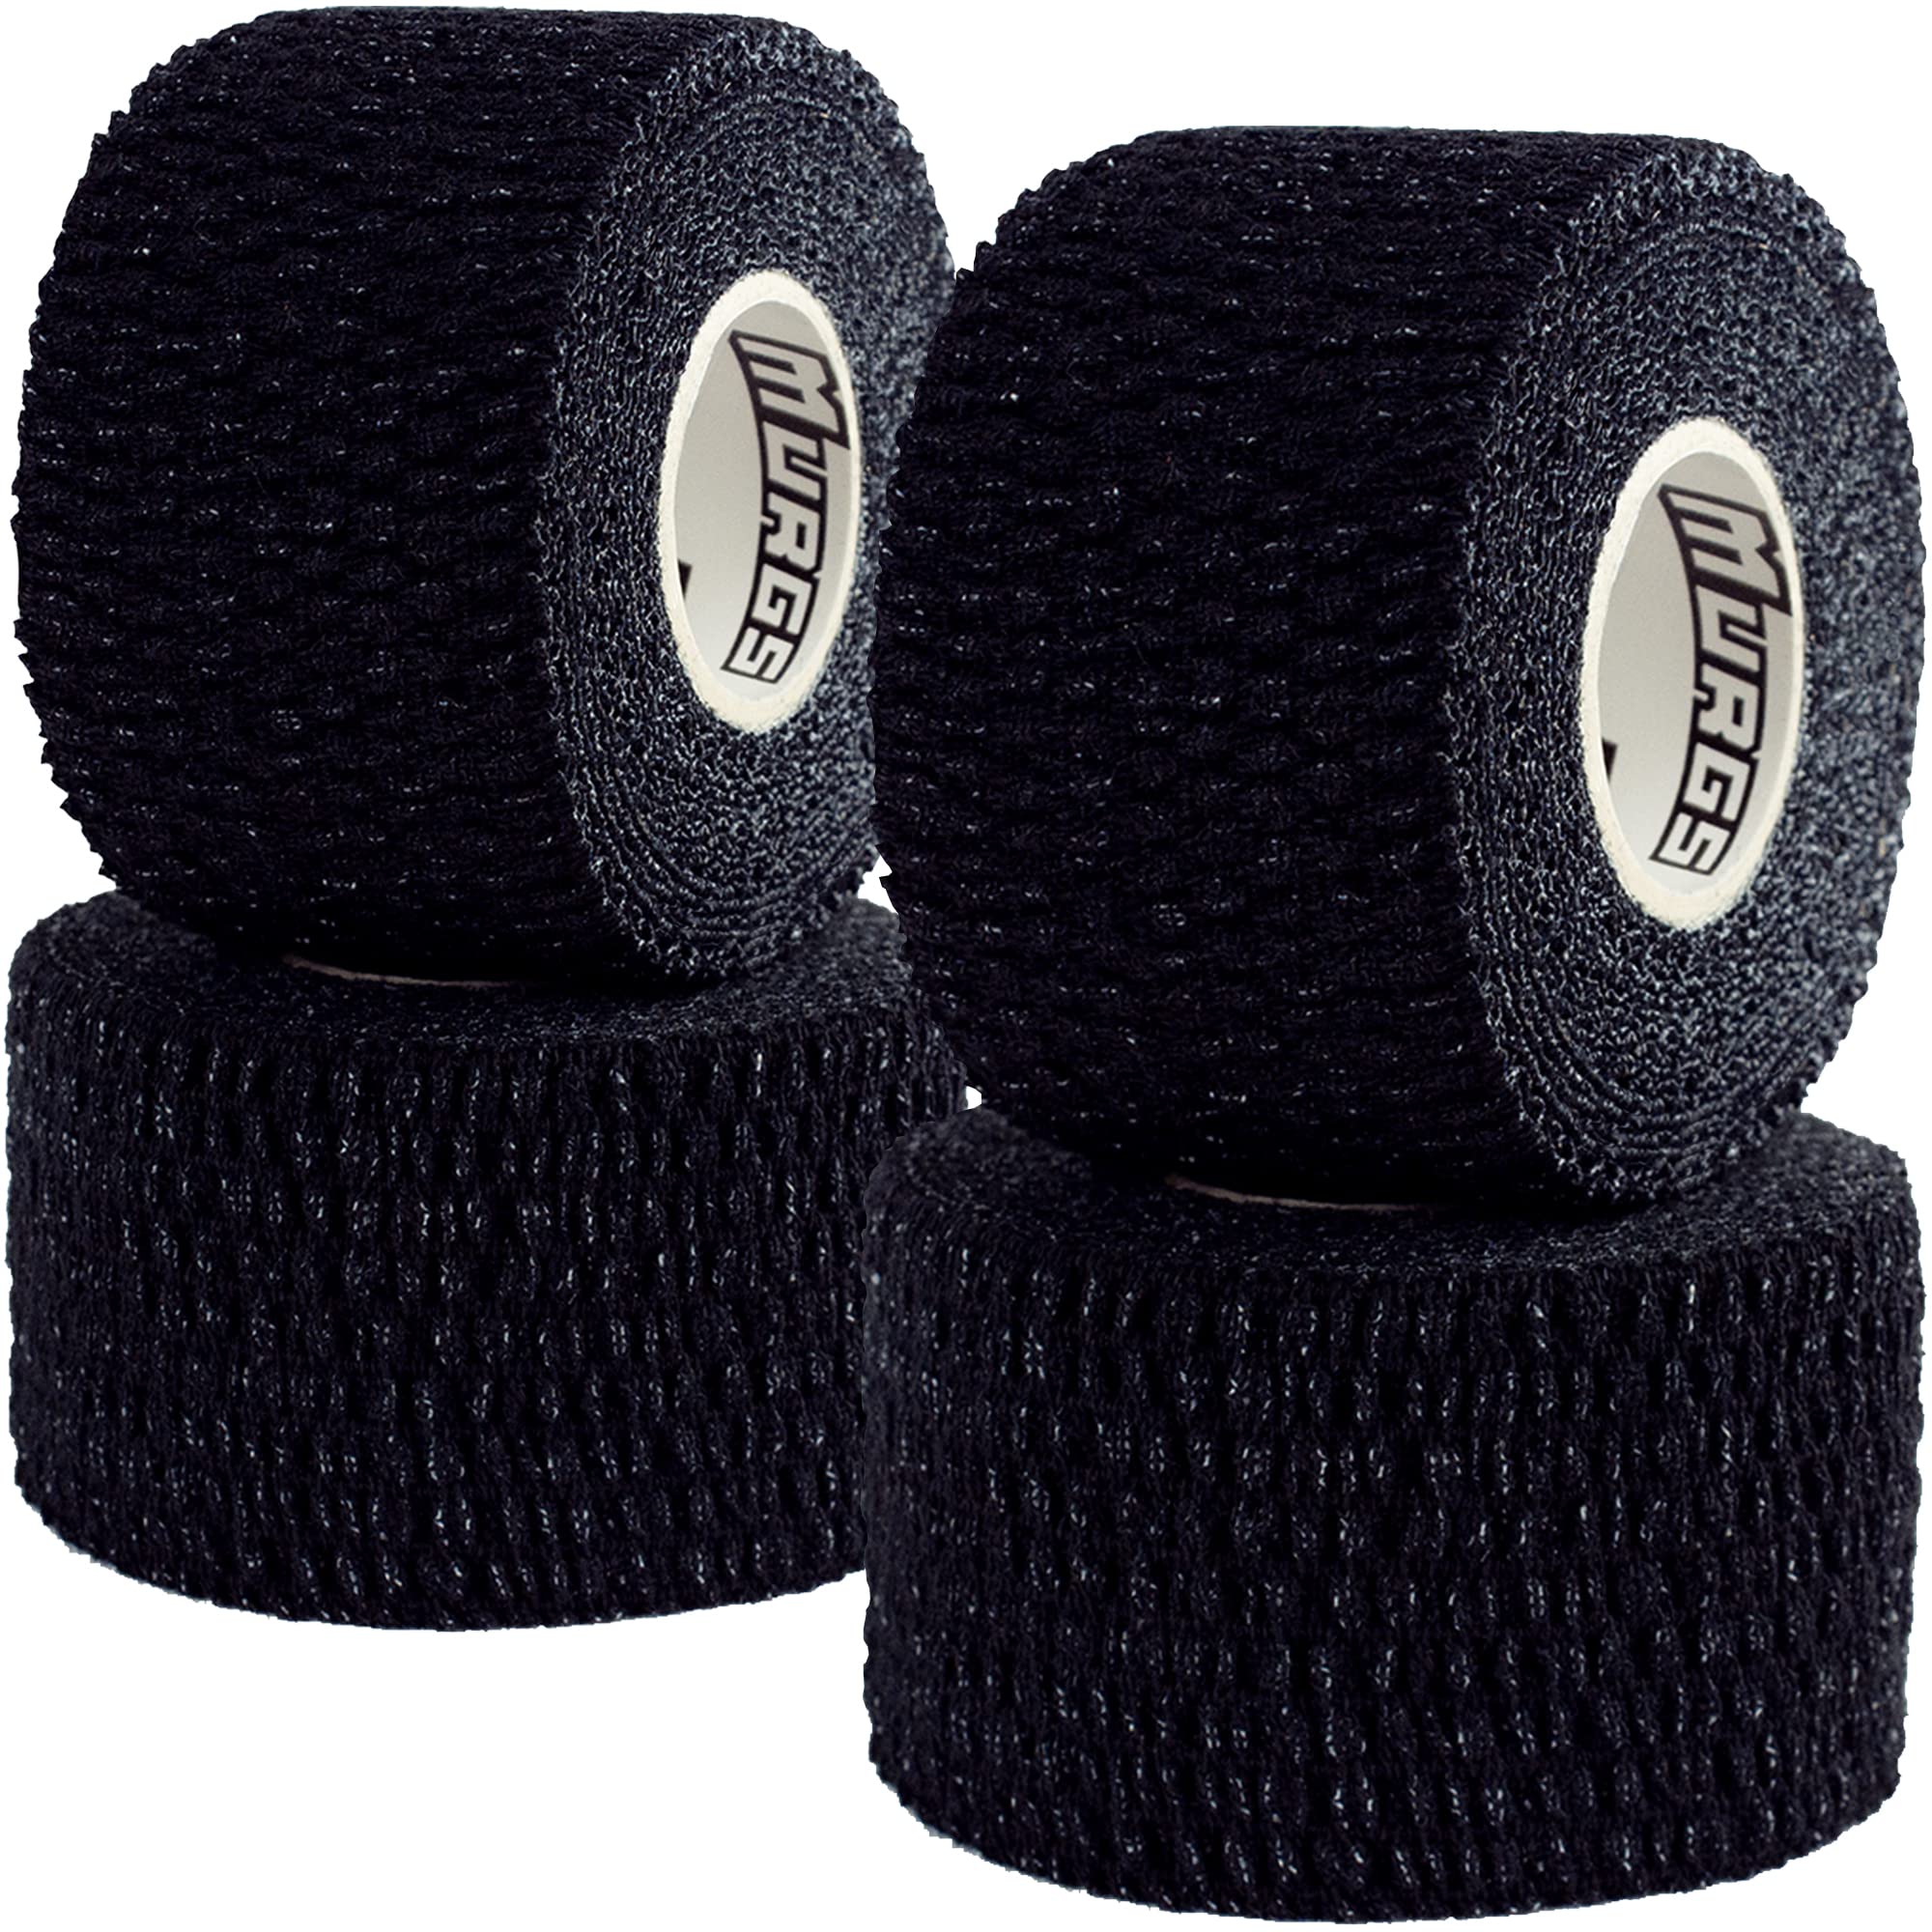 Adhesive Weightlifting Tape - Black  Weight lifting, Olympic lifting, Hook  grip